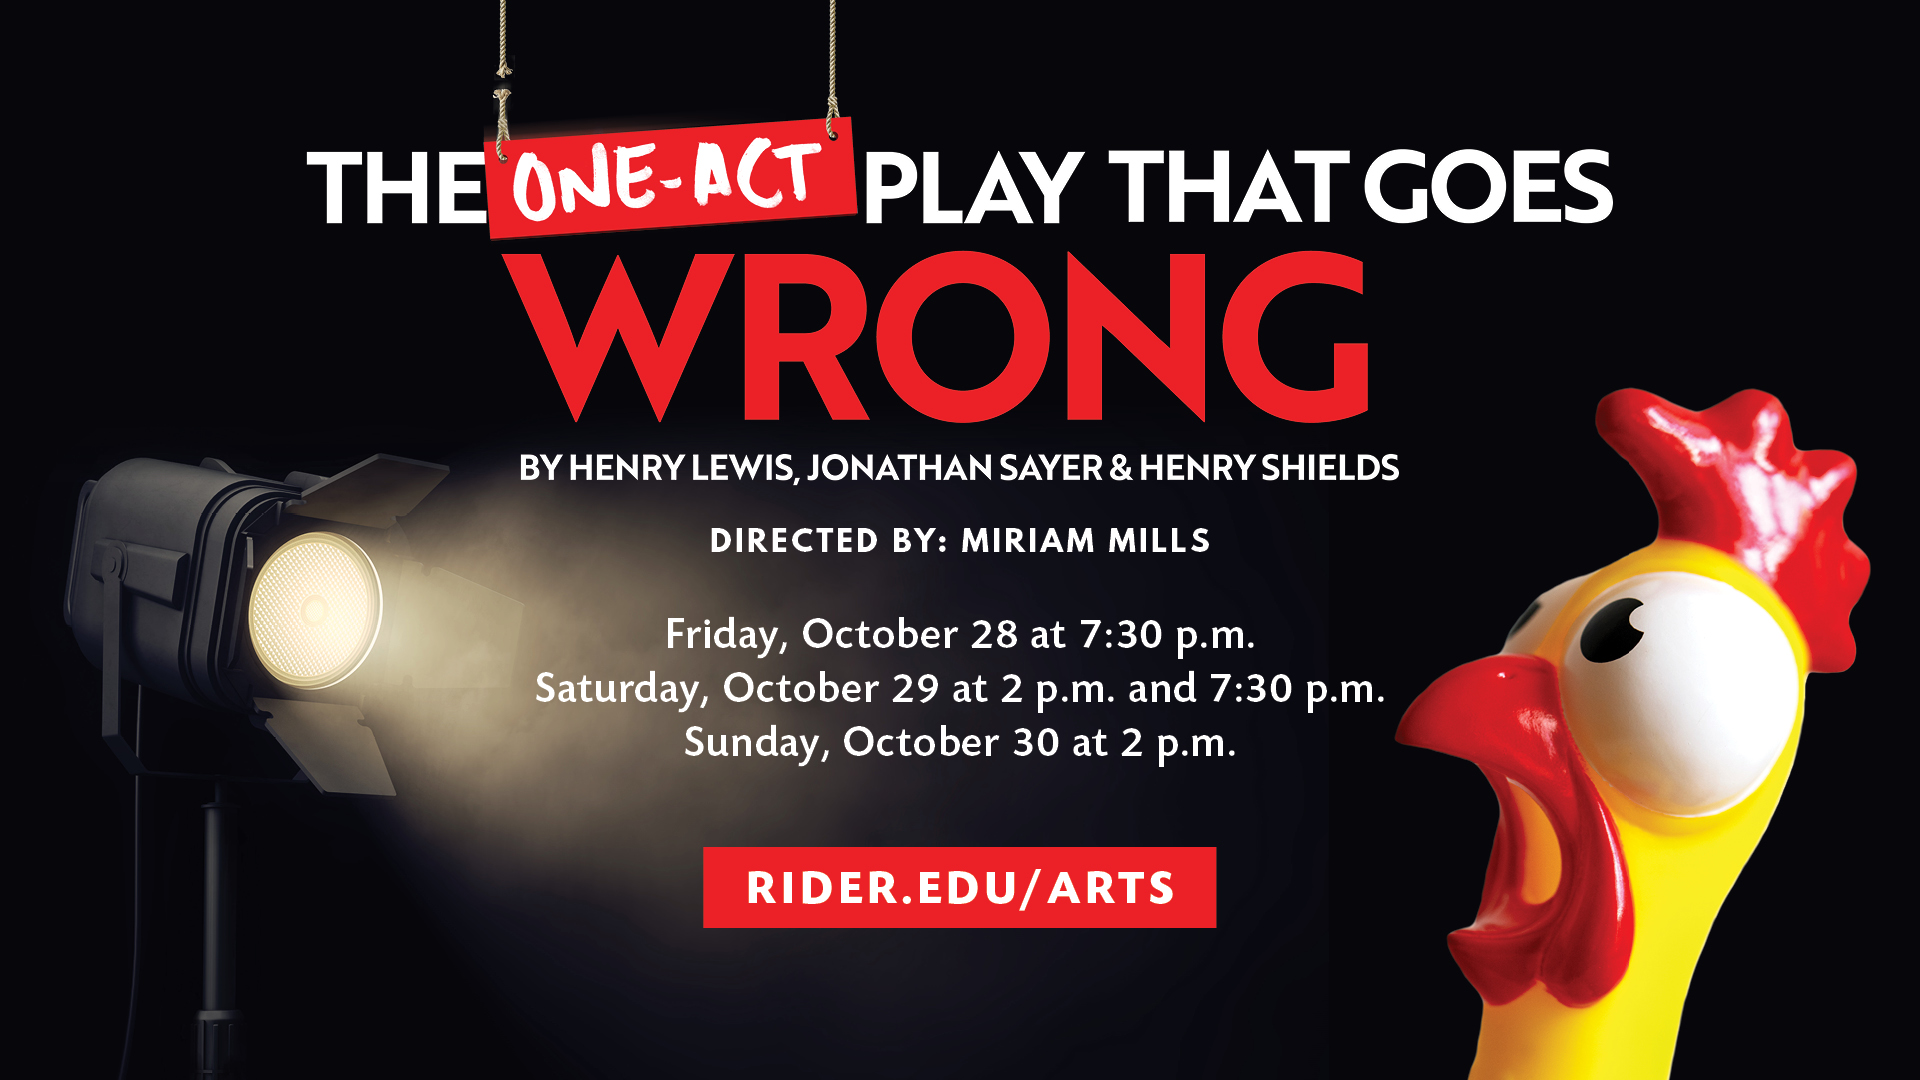 The One-Act Play That Goes Wrong graphic shows a rubber chicken looking surprised under a spotlight. 